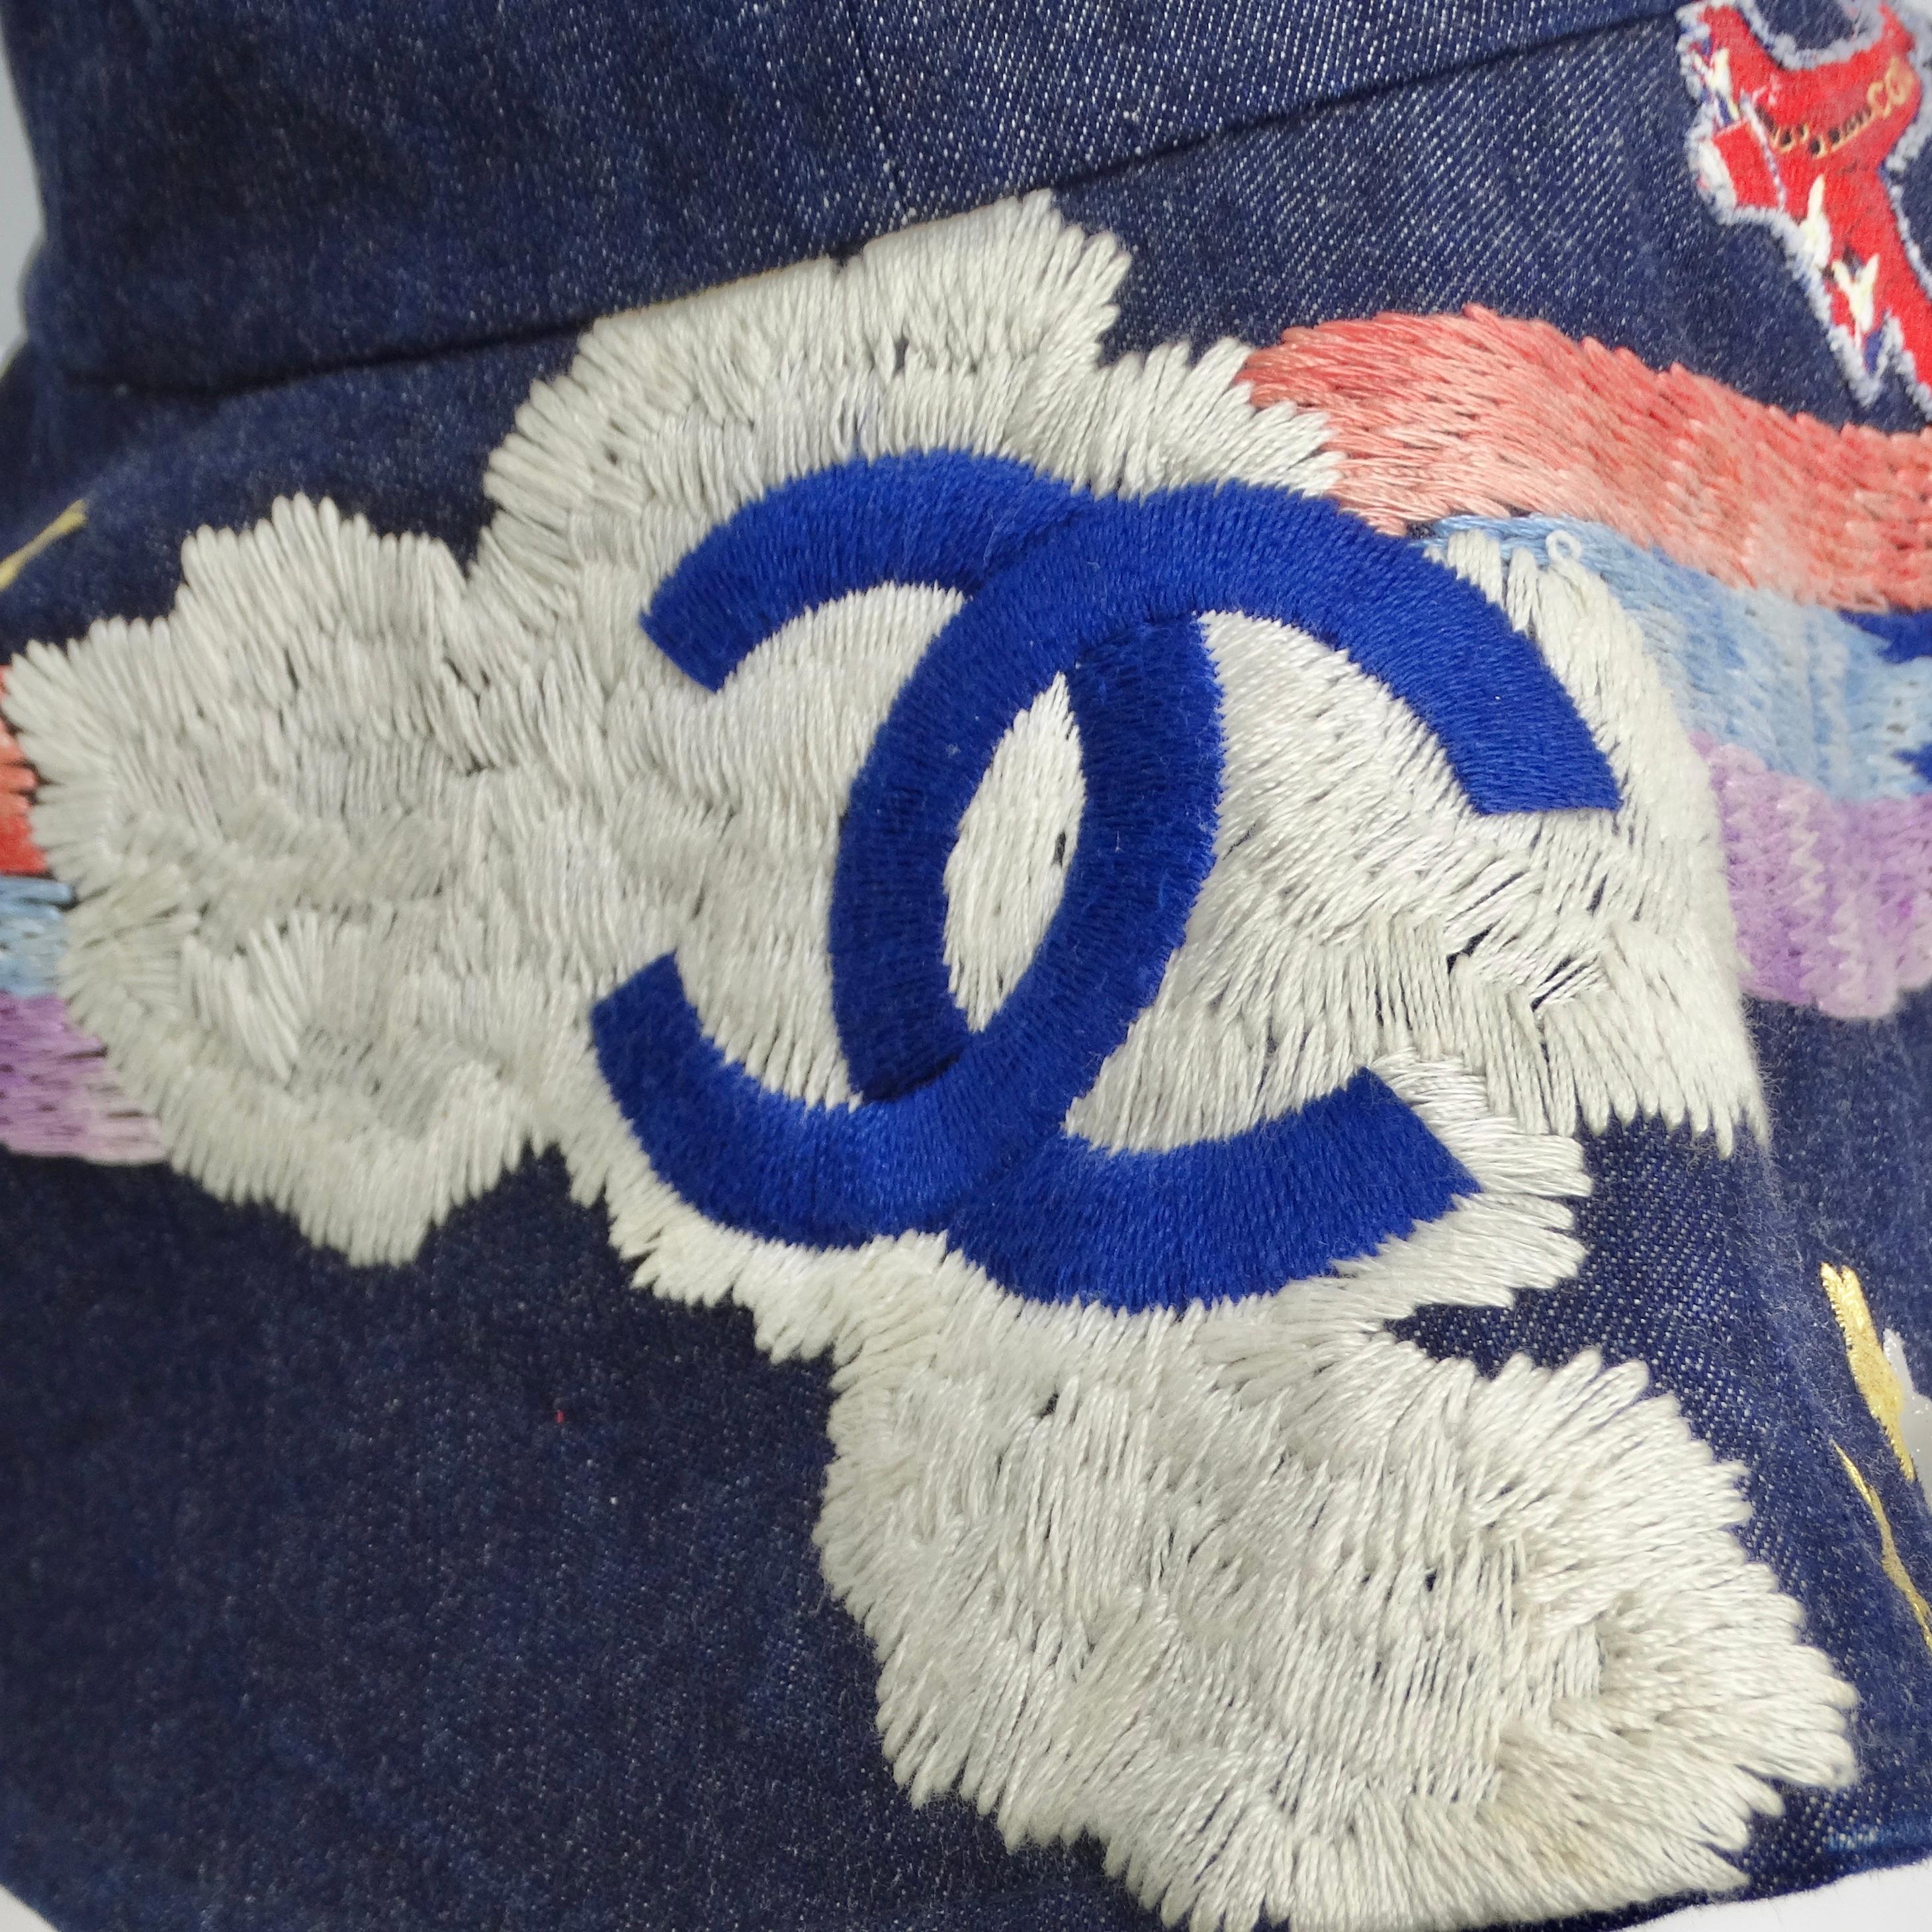 Introducing the Chanel Limited Edition Embroidered Jumbo Denim Hat, a stunning and bold accessory from Chanel's iconic Spring/Summer 2005 collection. Crafted from high-quality denim, this floppy hat exudes luxury and style with its jumbo silhouette